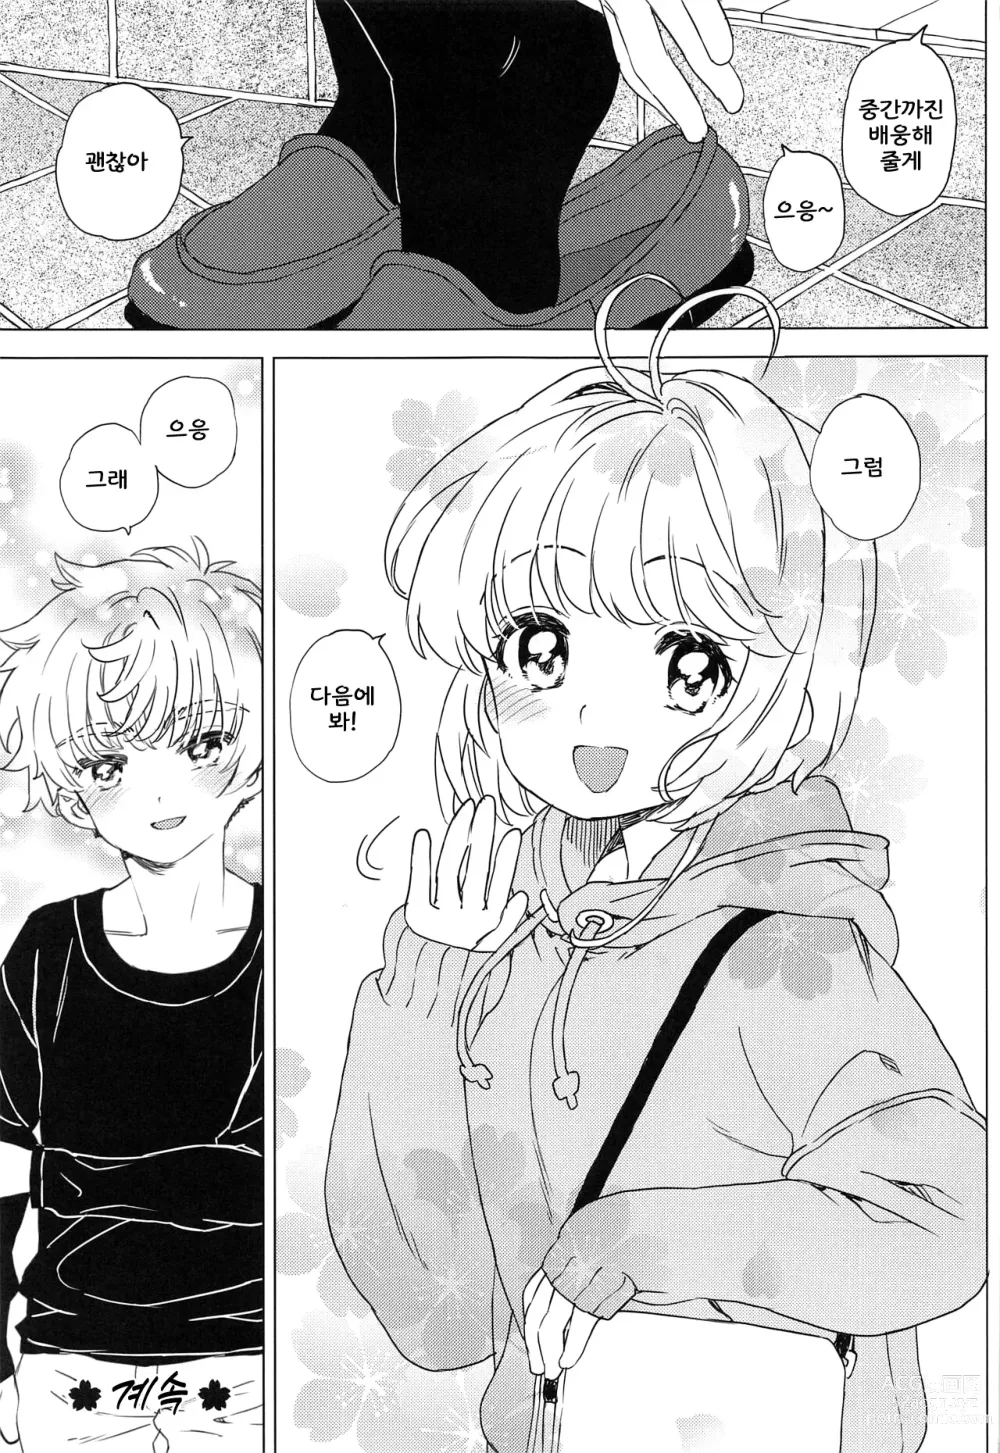 Page 26 of doujinshi 사쿠라와 샤오랑의 집 데이트